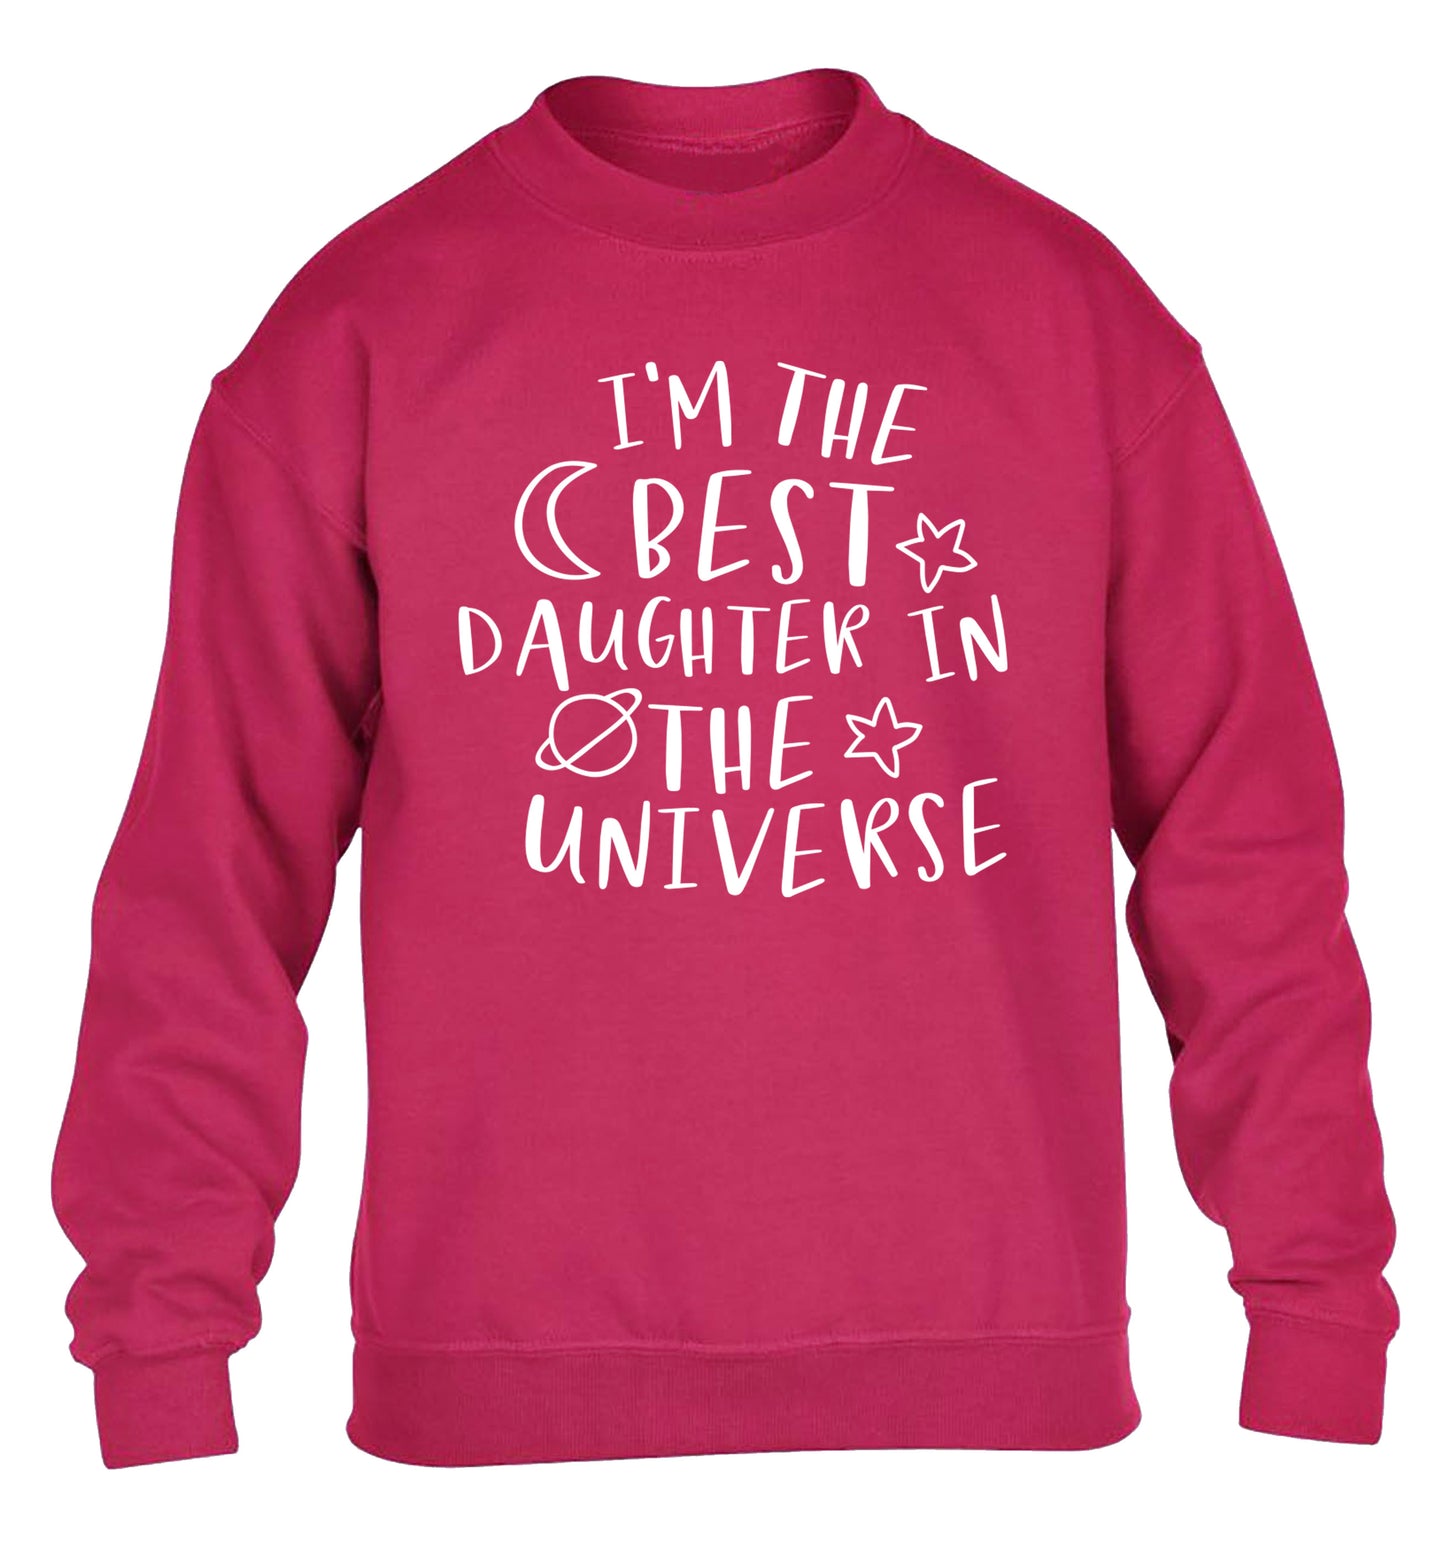 I'm the best daughter in the universe children's pink sweater 12-13 Years